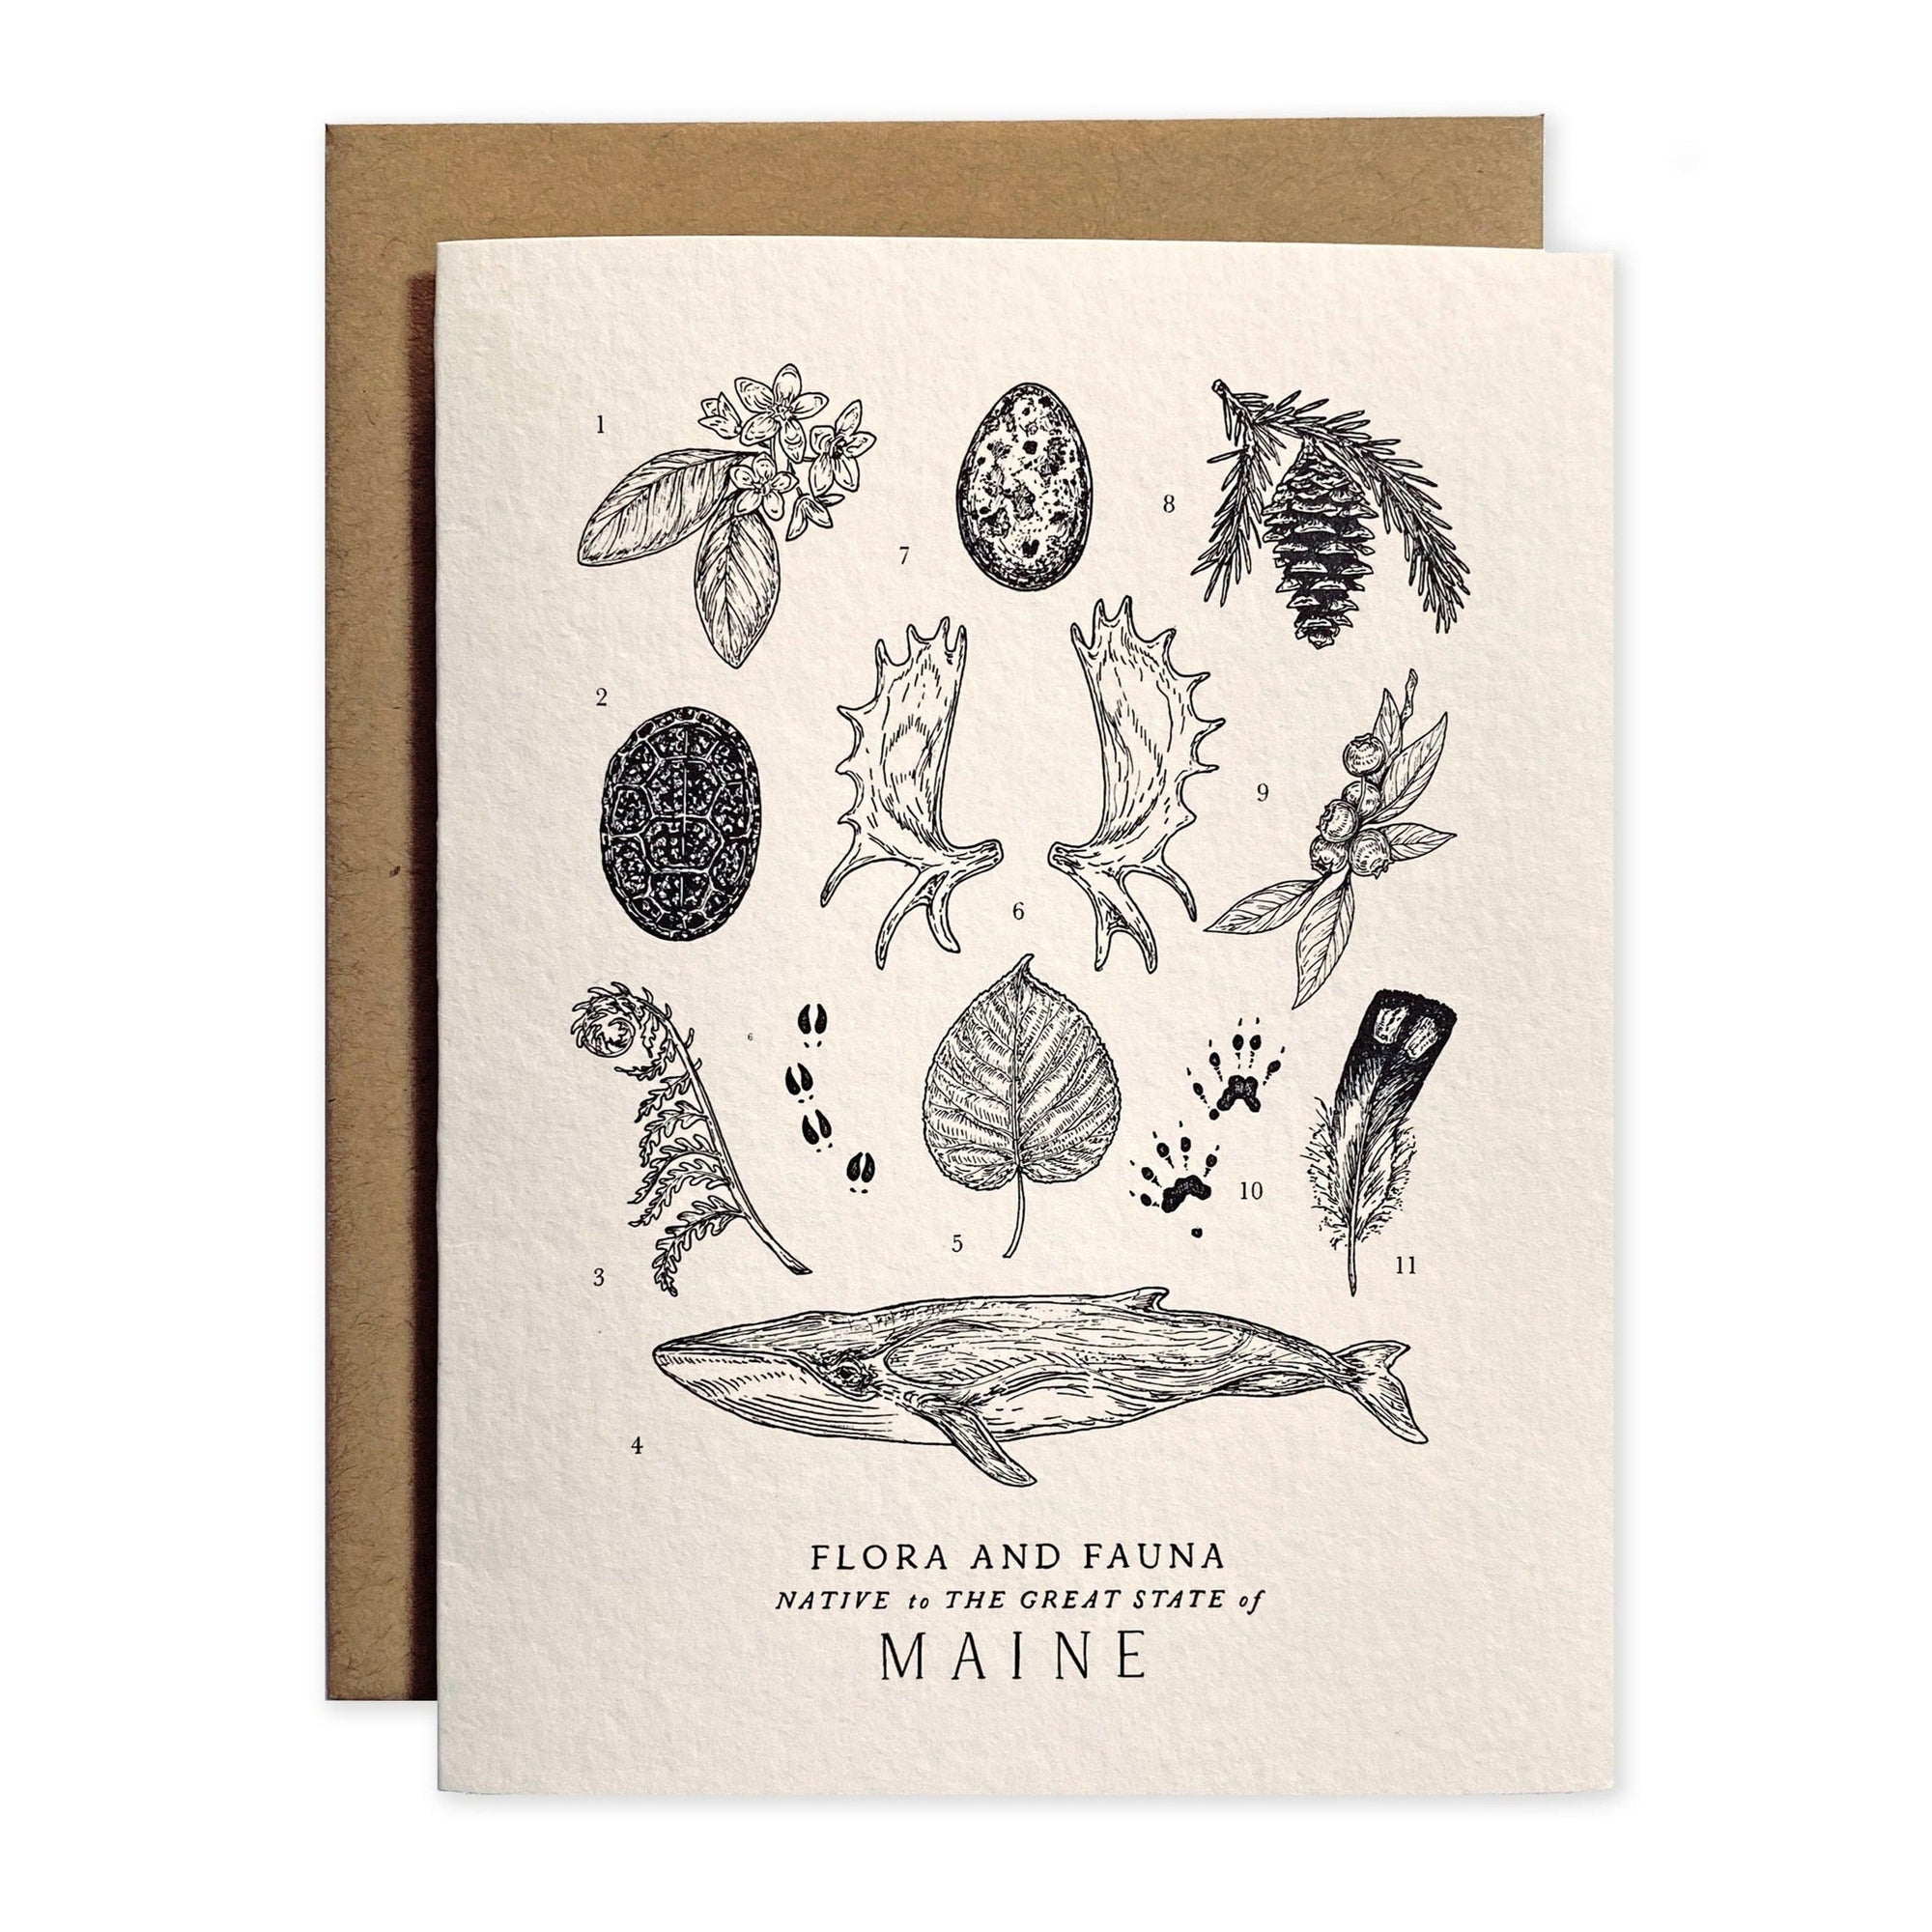 A Maine Field Guide Greeting Card with illustrations of plants and animals from The Wild Wander.